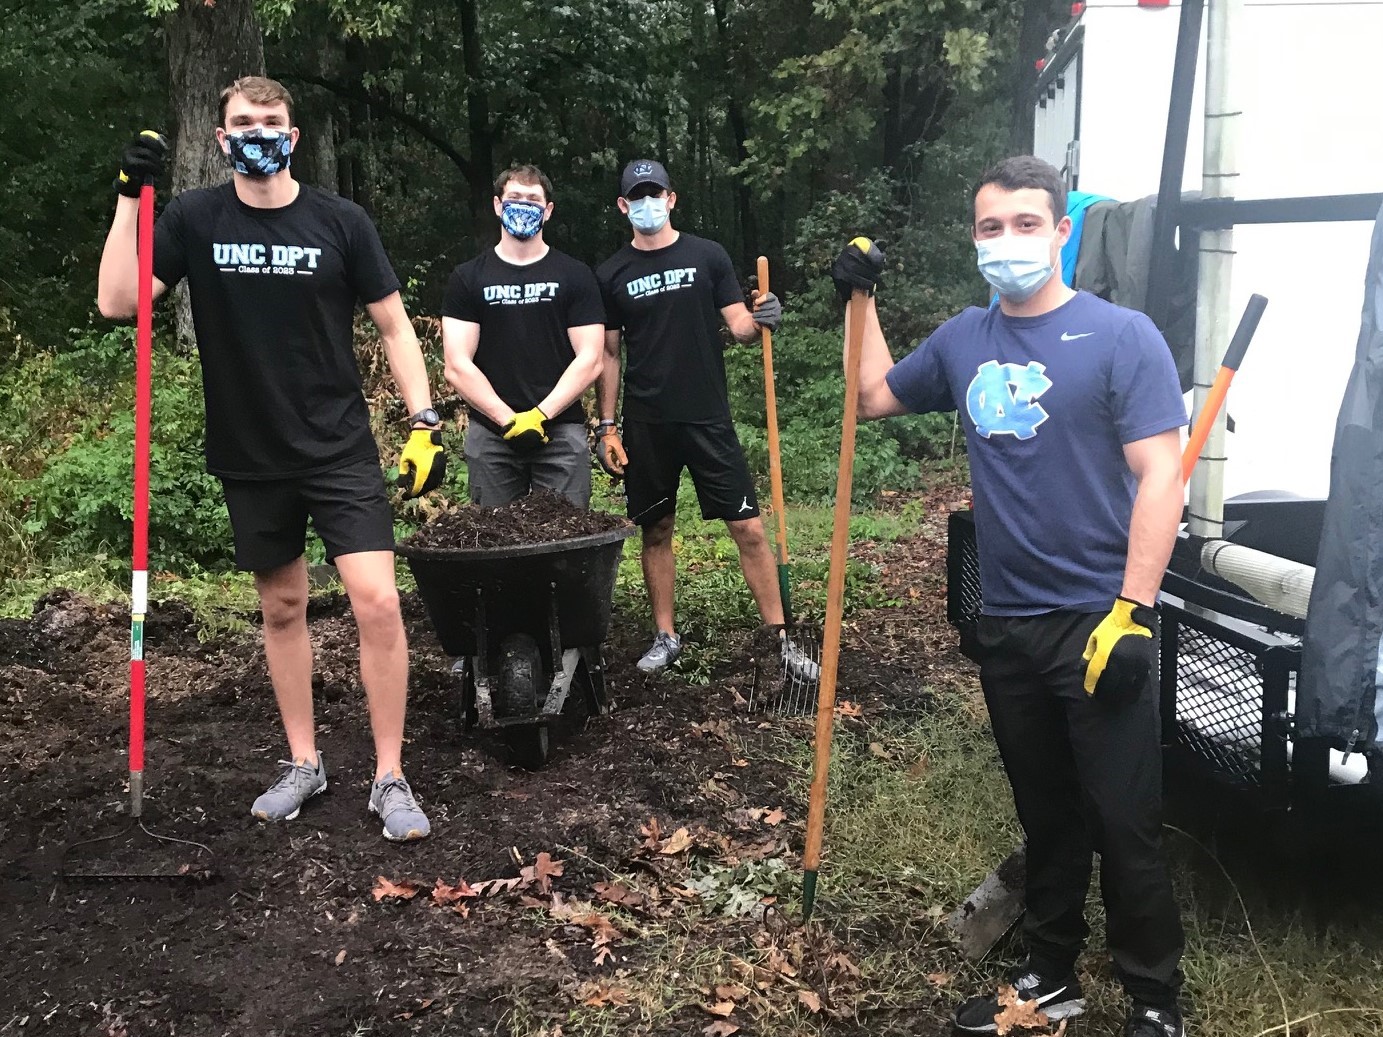 4 male college students standing in mulch holding shovels, rakes and a wheelbarrow. All are wearing masks.